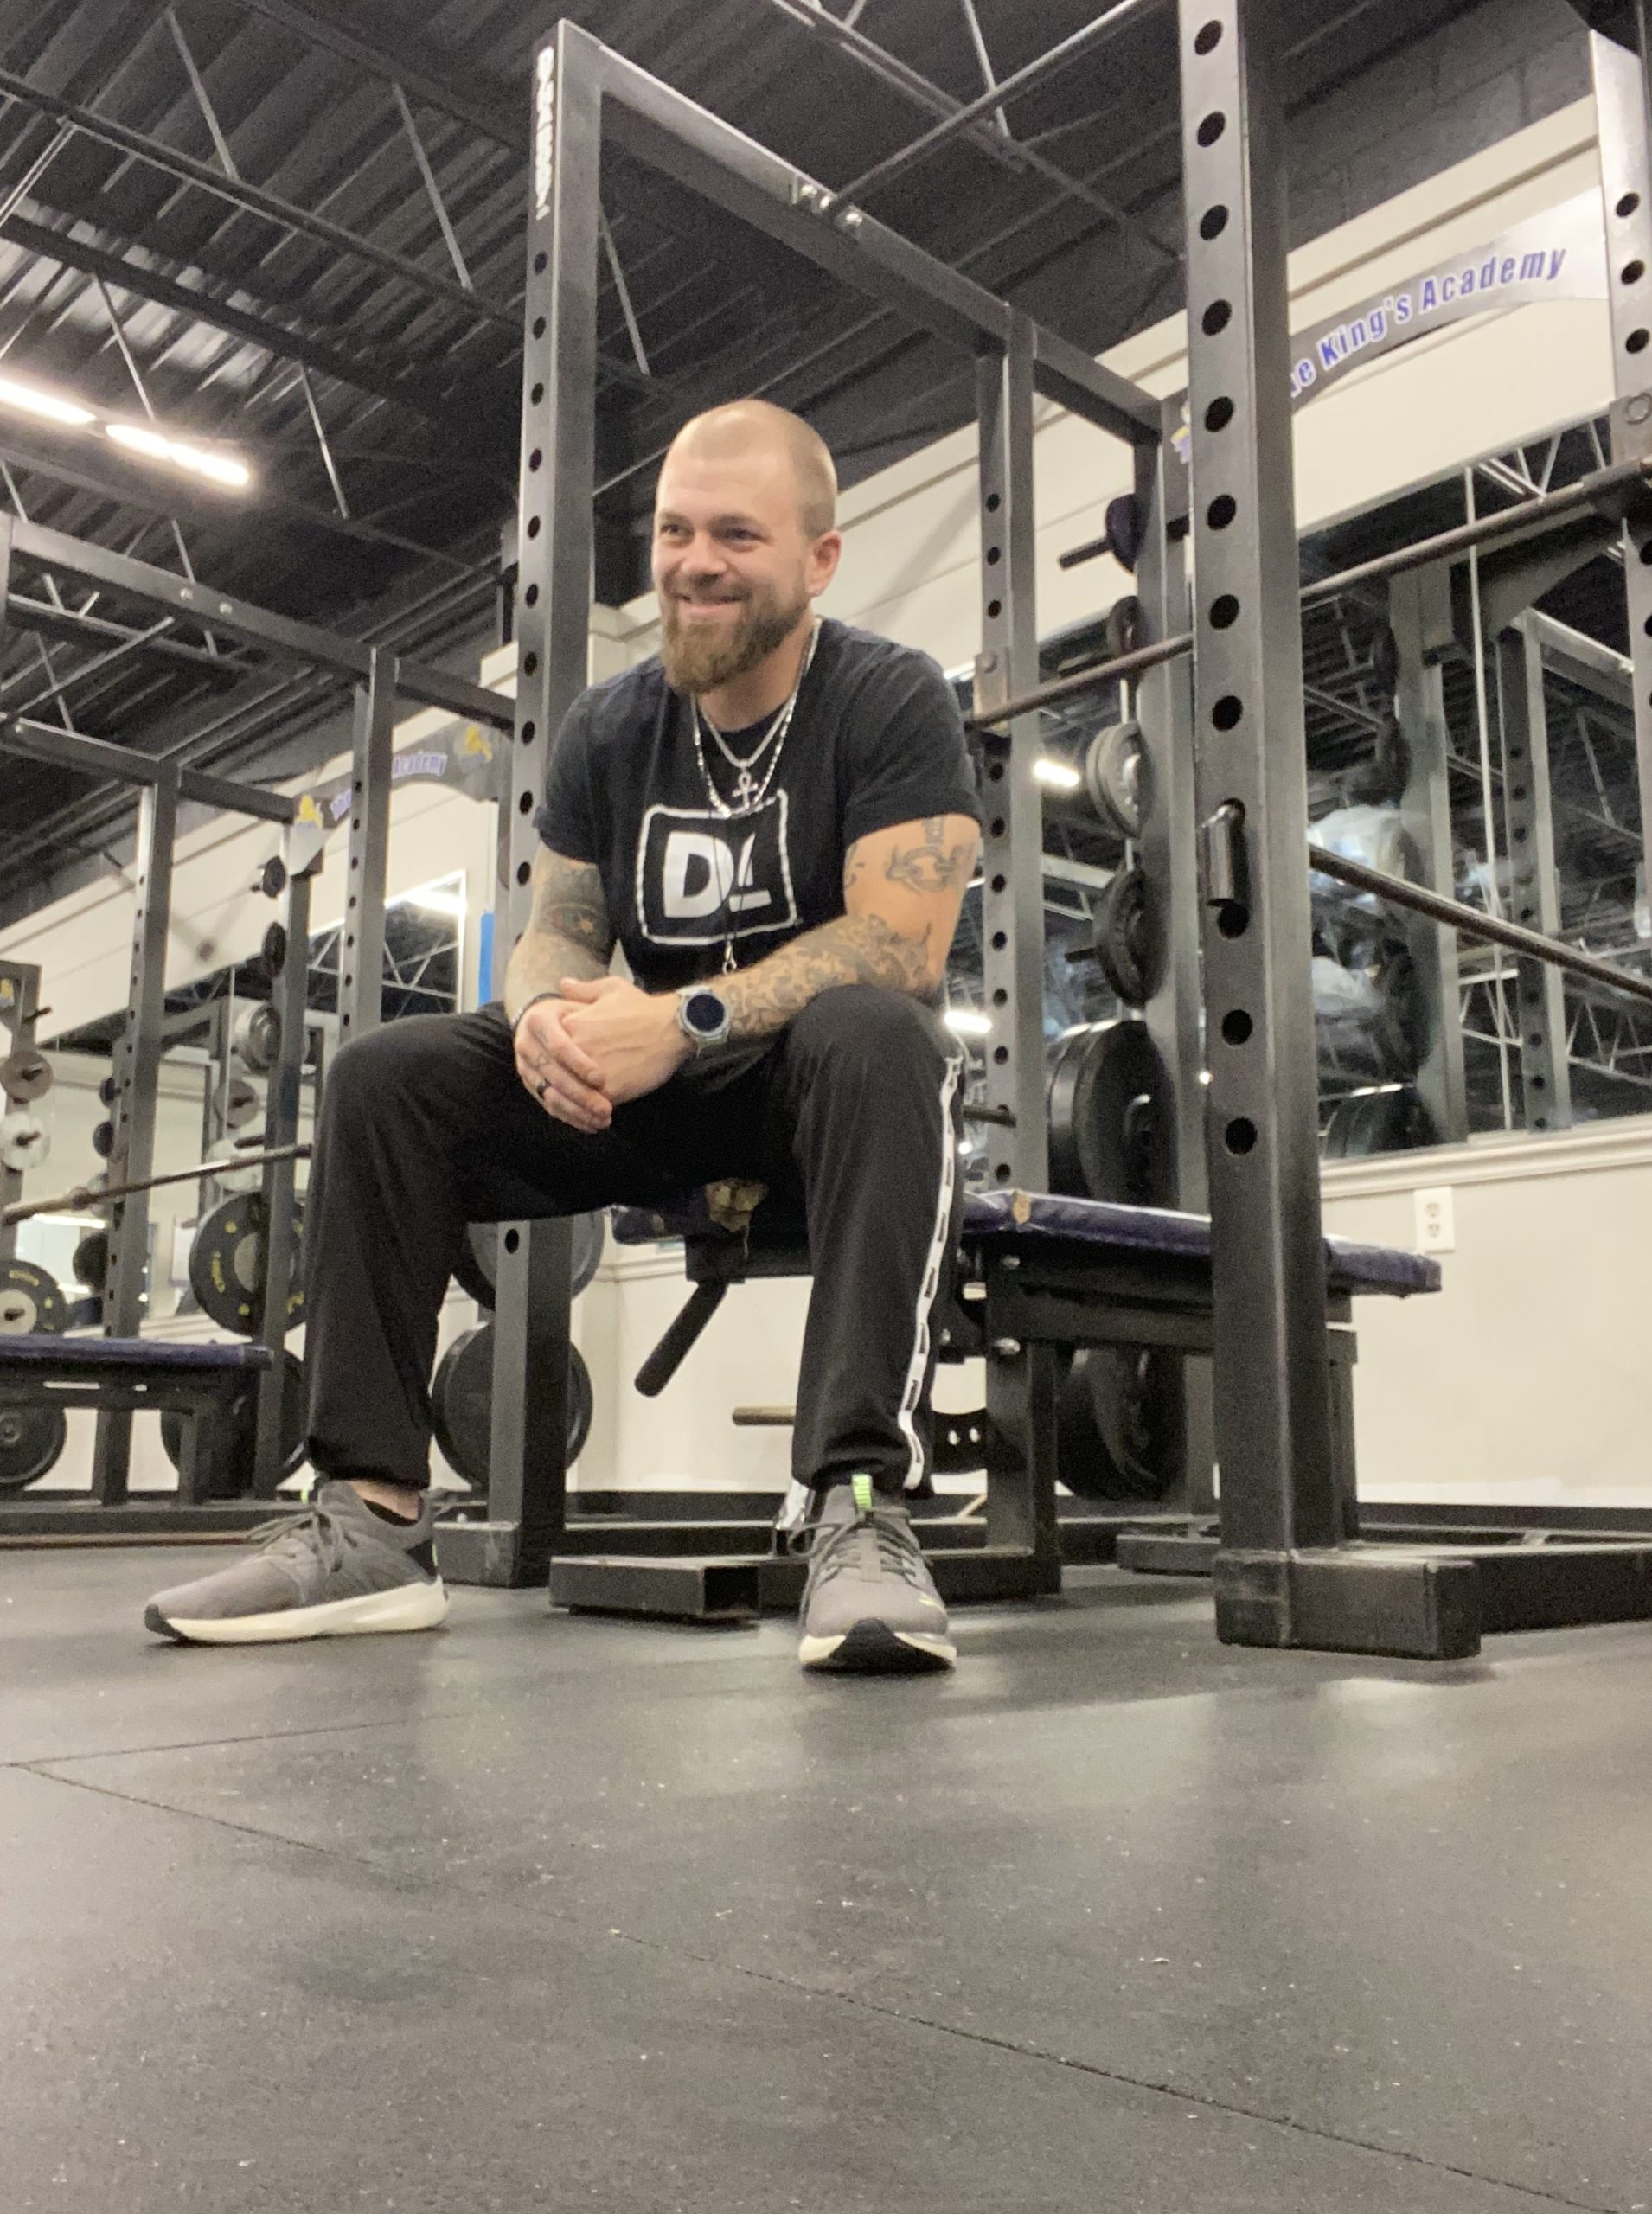 Adam Kerr sitting on a weight bench smiling in fitness attire